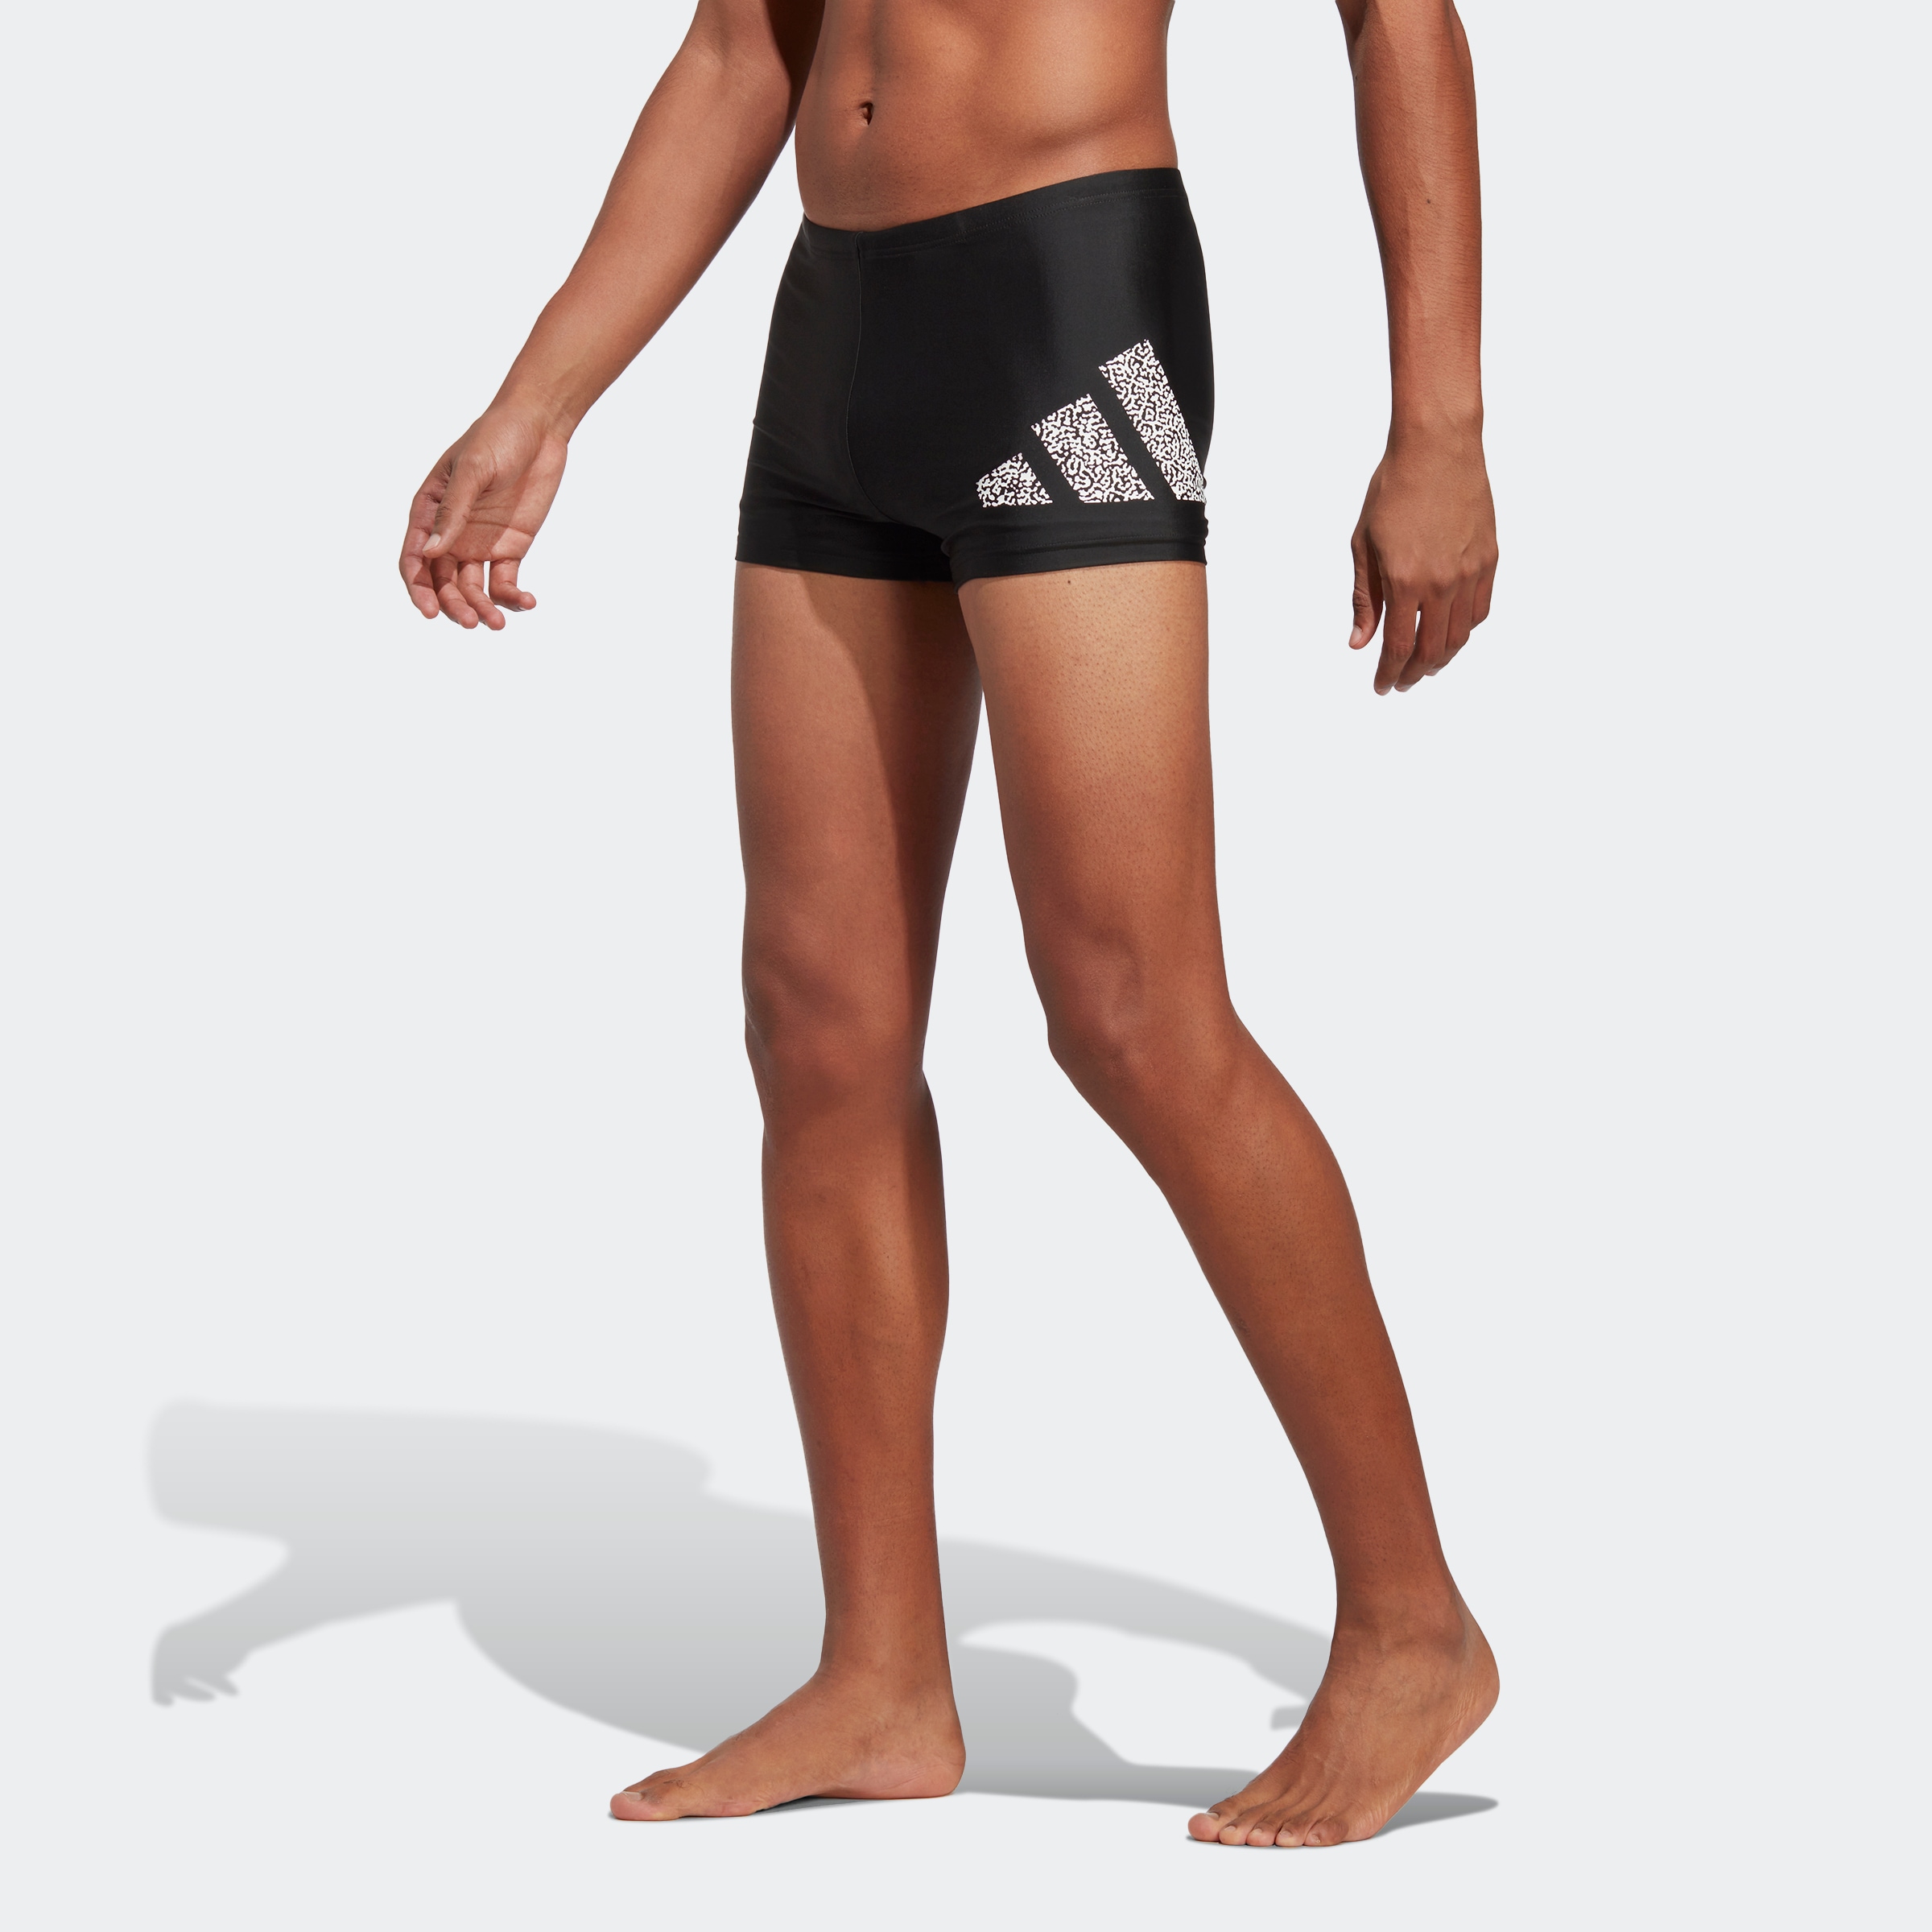 BOXER-«, adidas (1 Badehose Performance »BRANDED OTTO St.) online bei